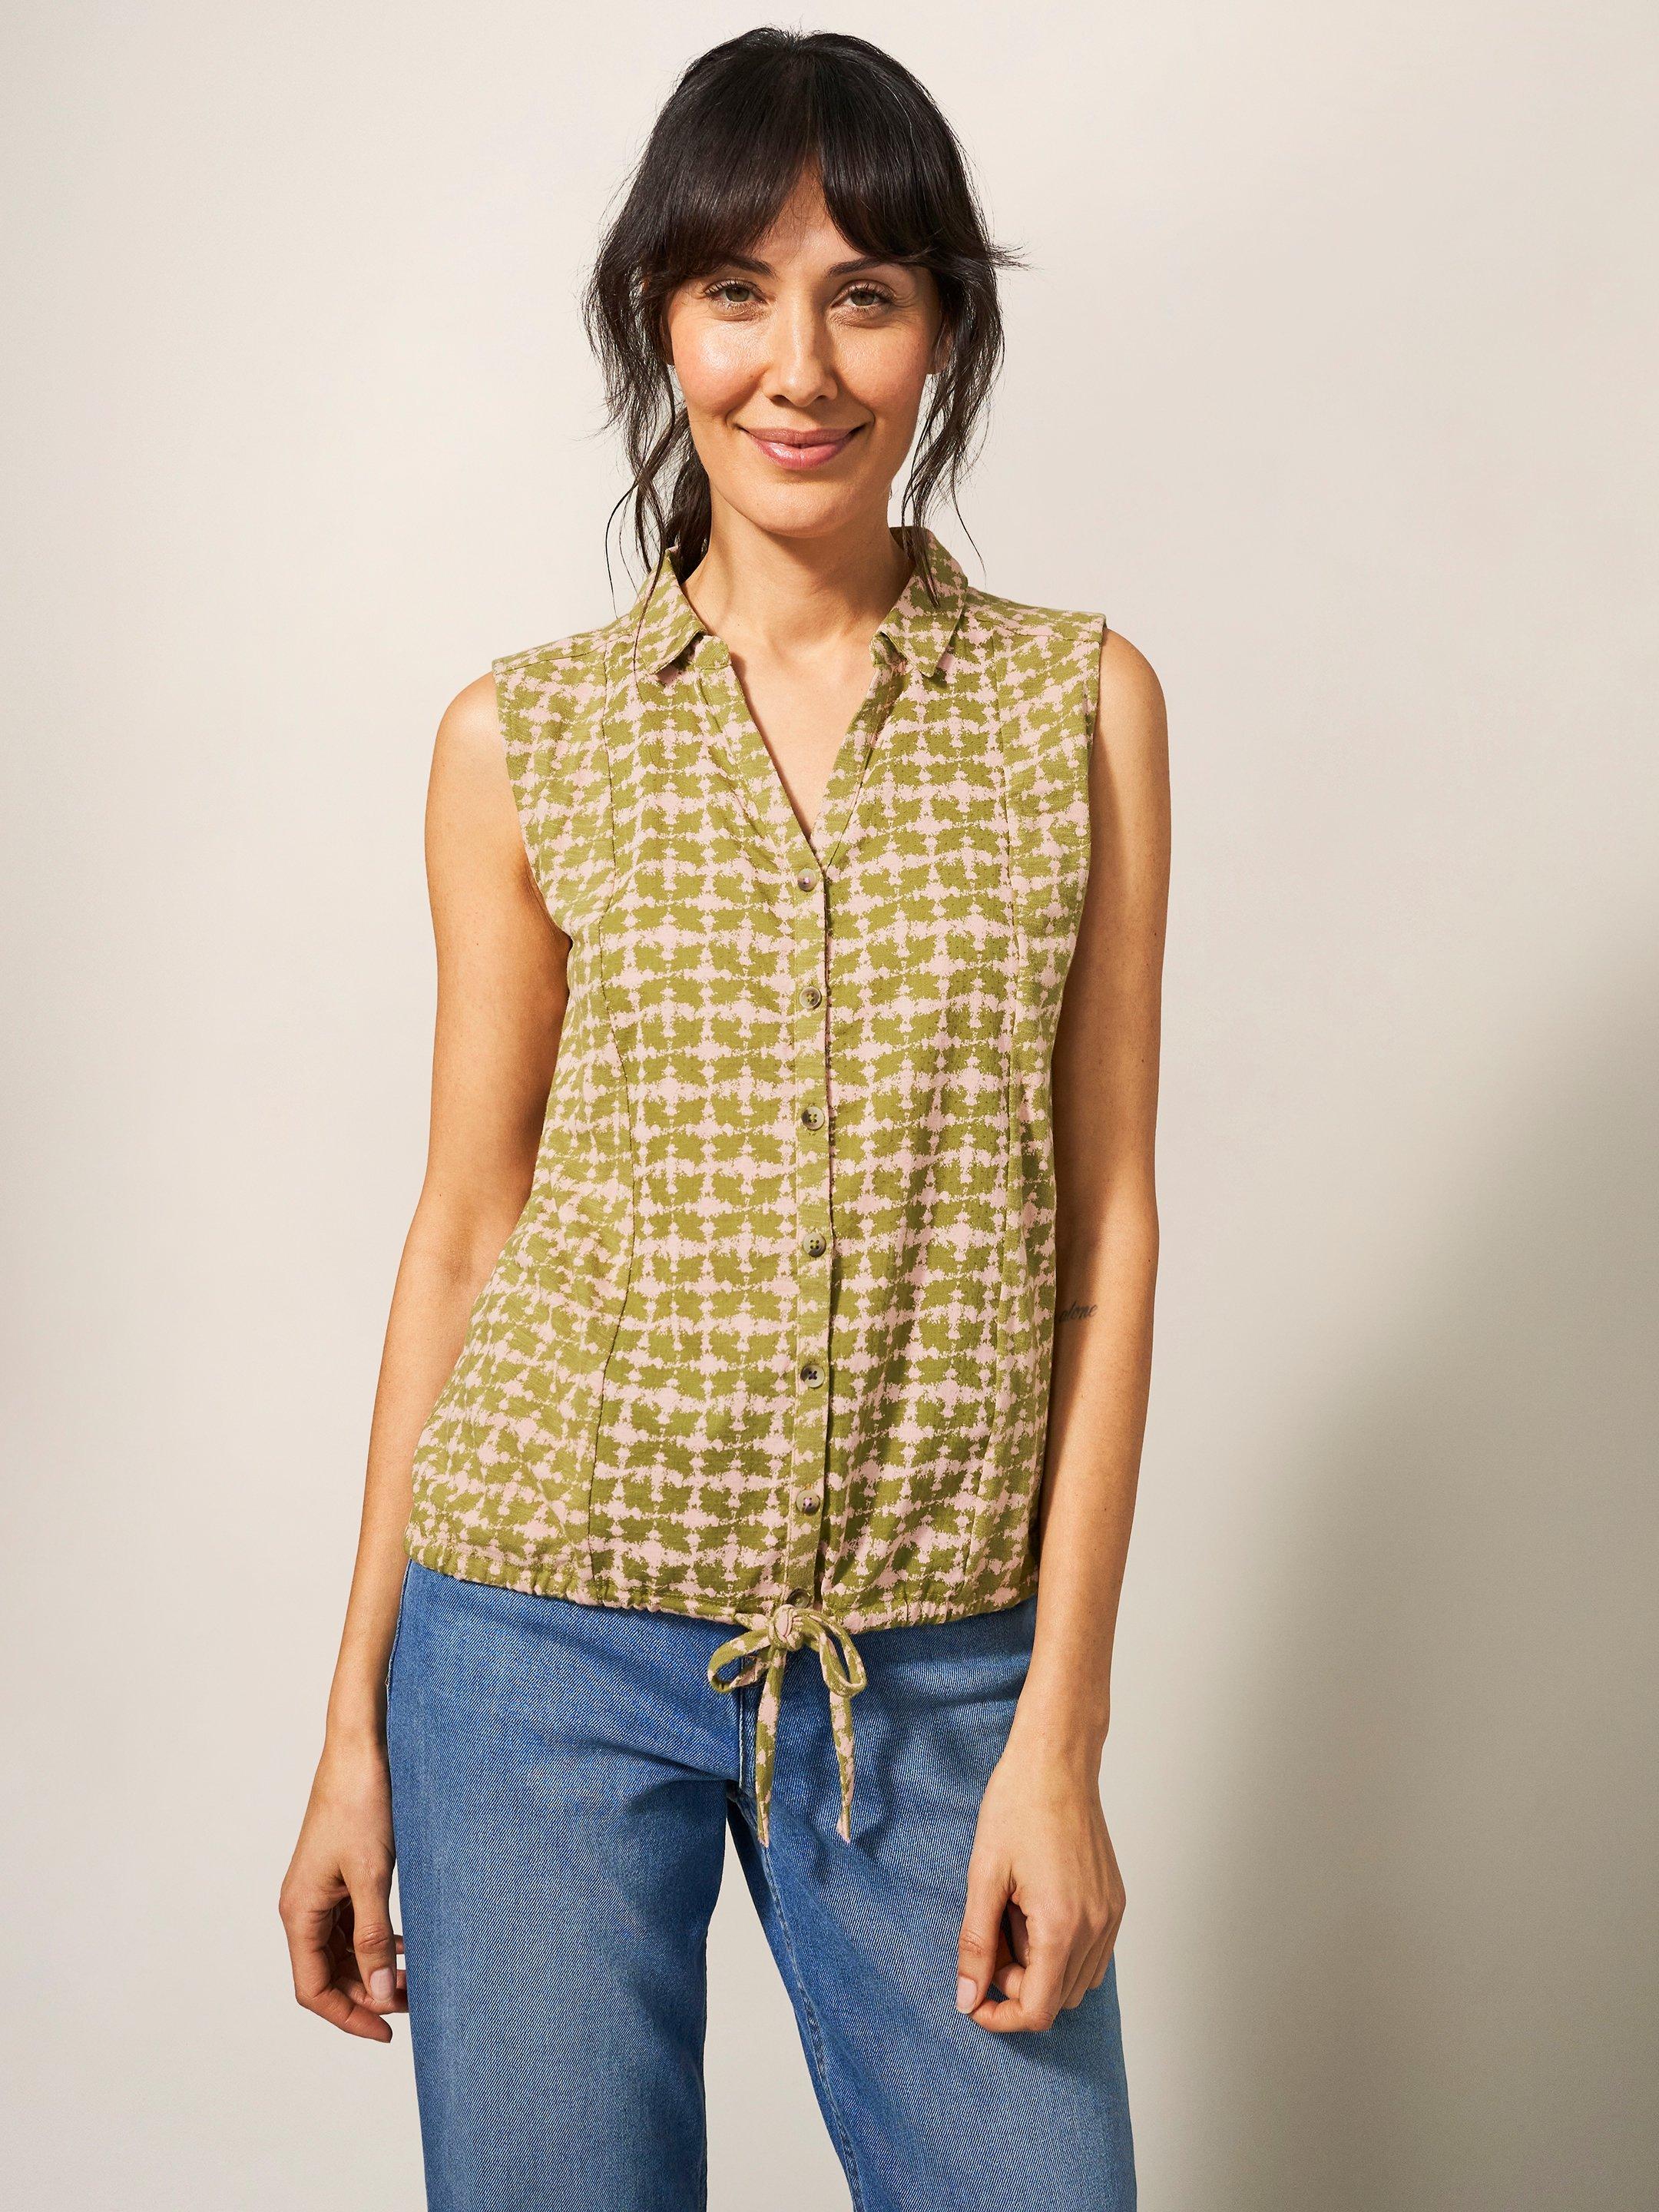 FLOWING GRASSES JERSEY SHIRT in GREEN PR - LIFESTYLE